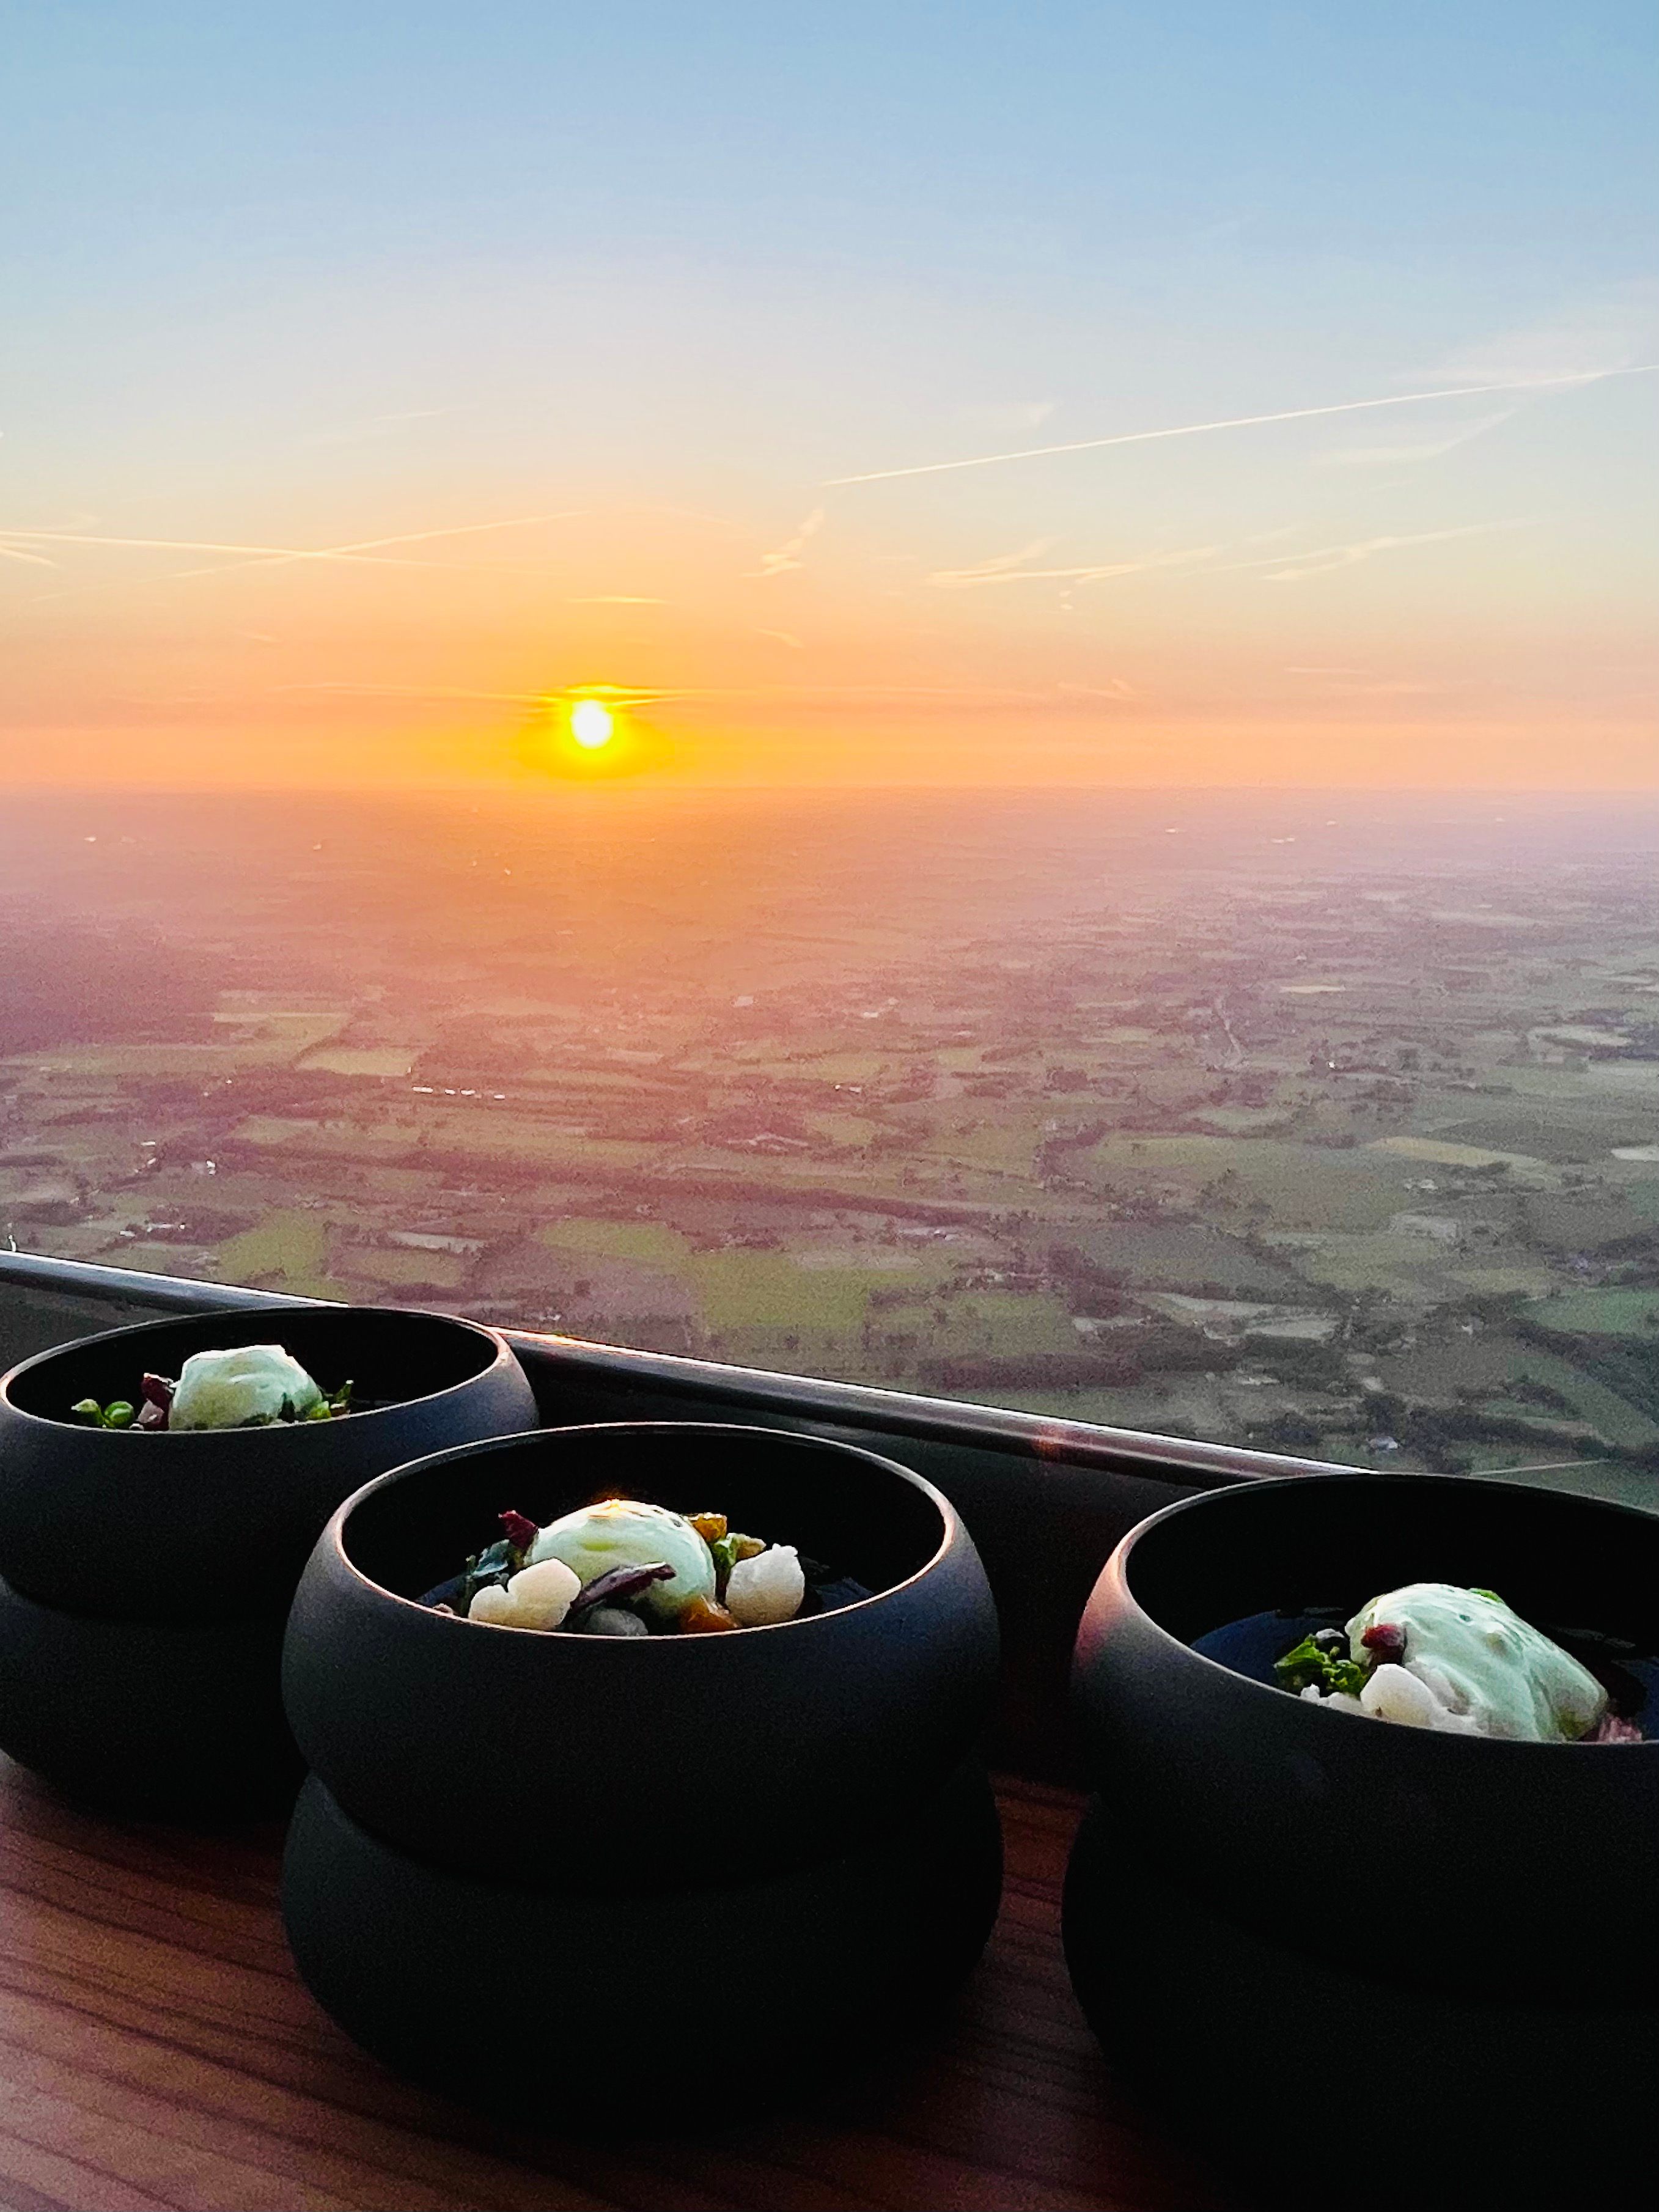 It's hard to beat the views at this restaurant in the sky.